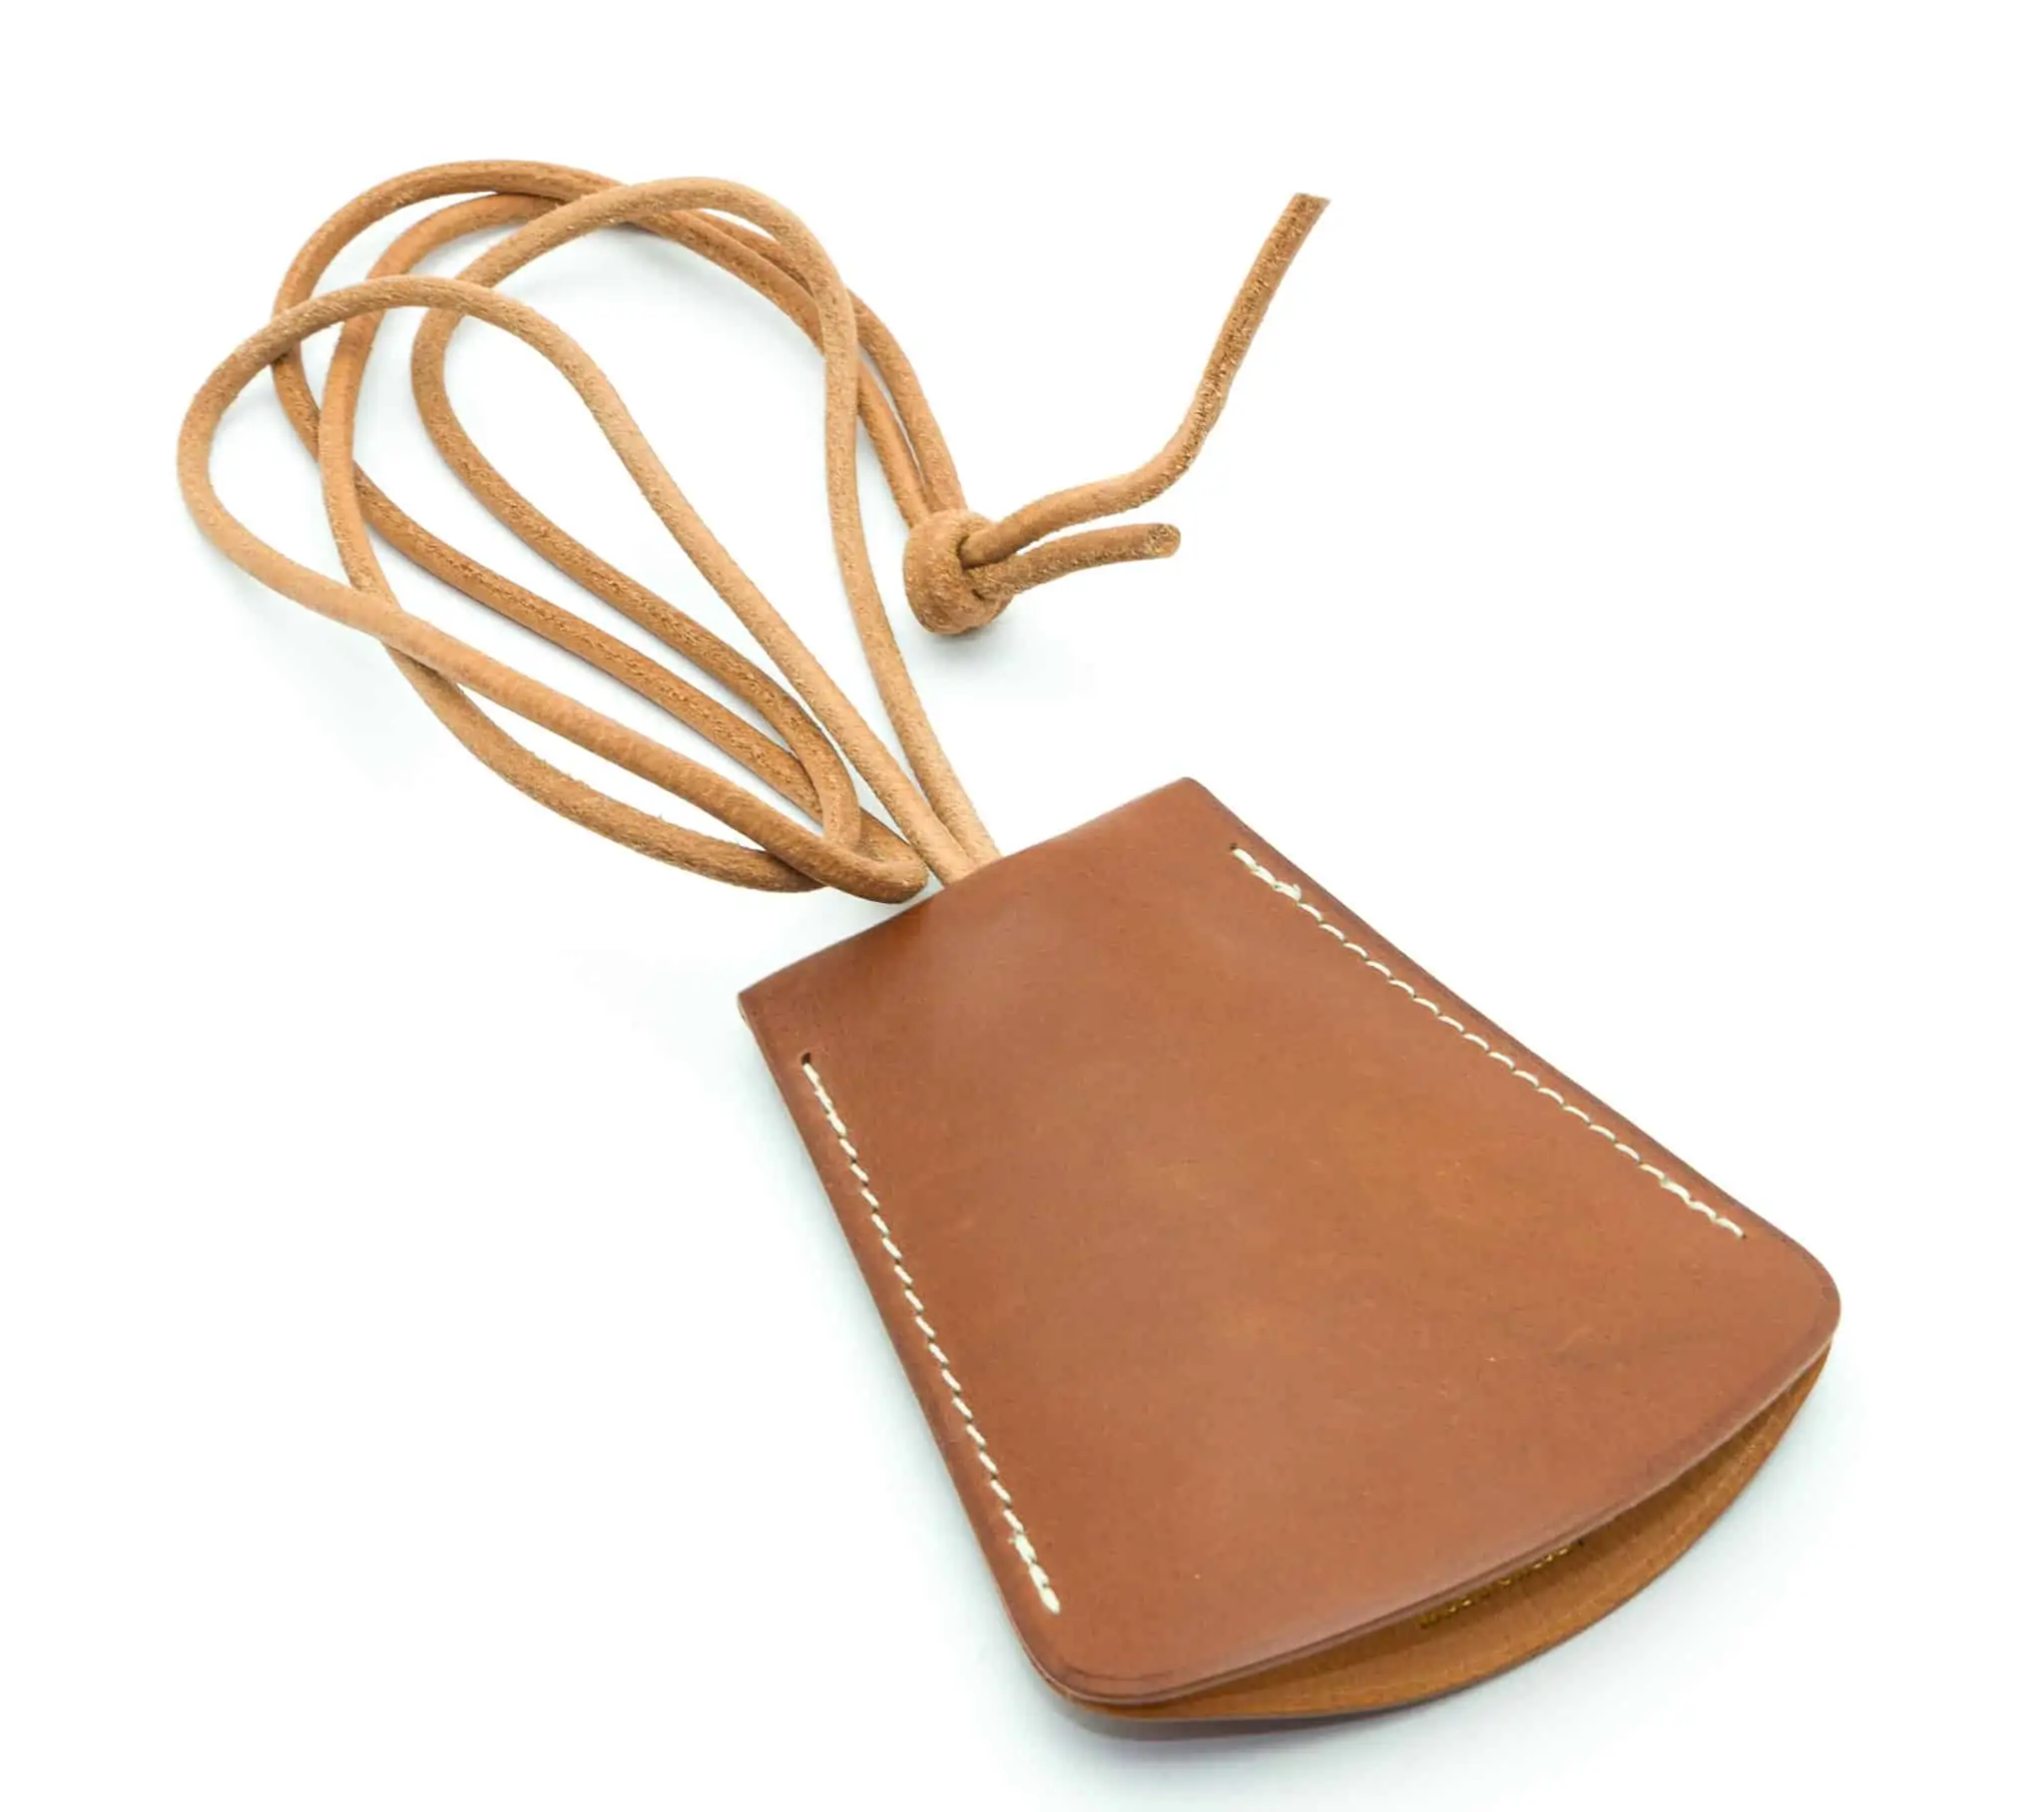 Leather keys pendant made in sweden - Katheley's